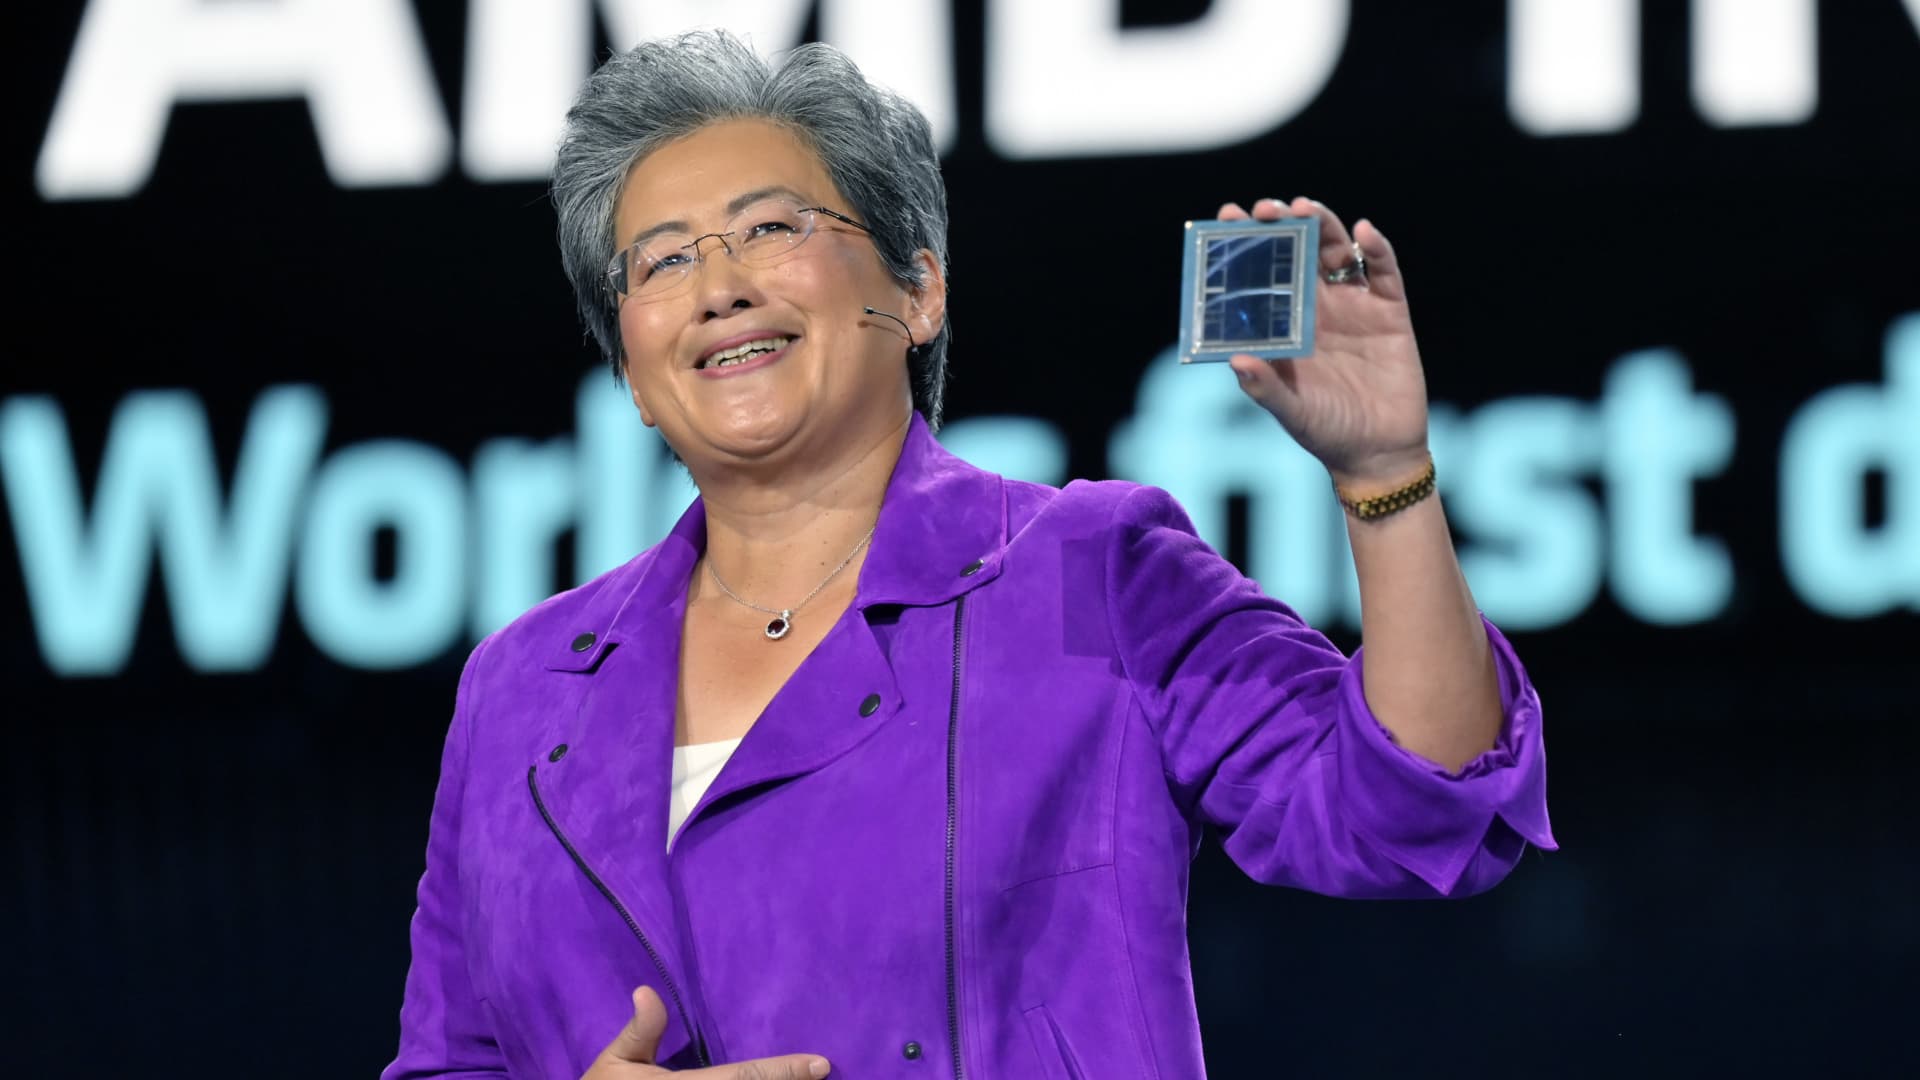 AMD reveals new A.I. chip to challenge Nvidia’s dominance